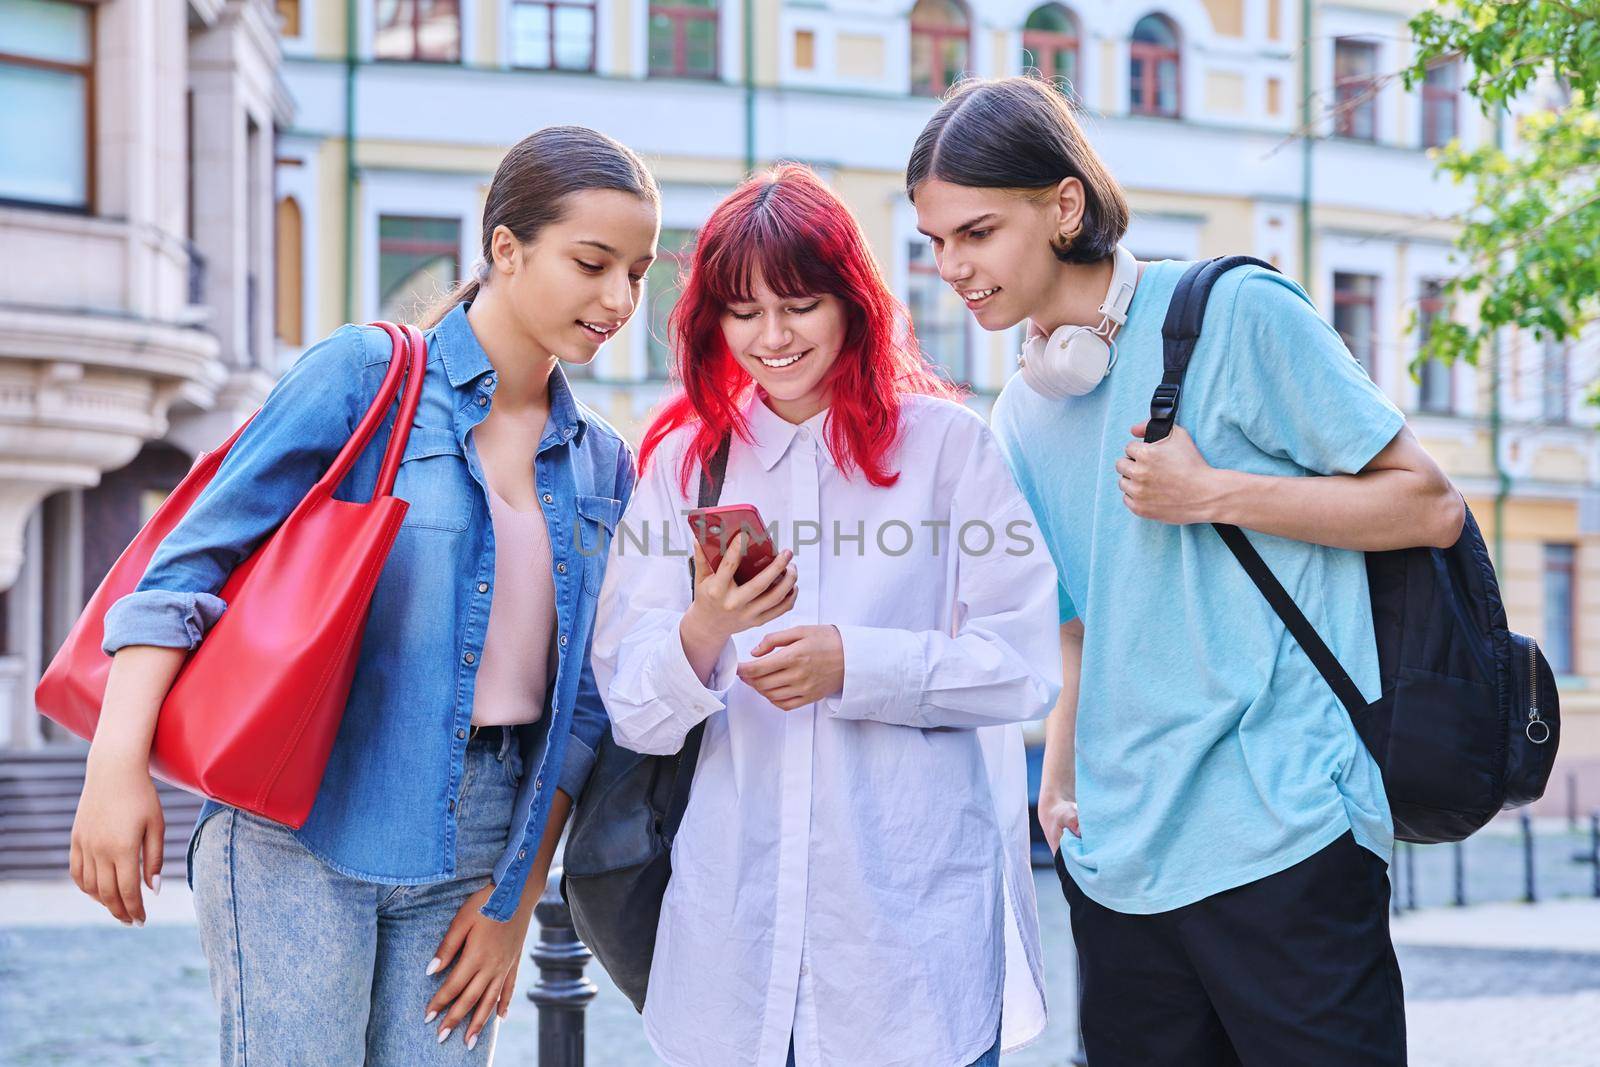 Three teenage friends met talking having fun outdoors. Smiling laughing teenagers with smartphone, together on city street. Communication, friendship, youth, lifestyle concept